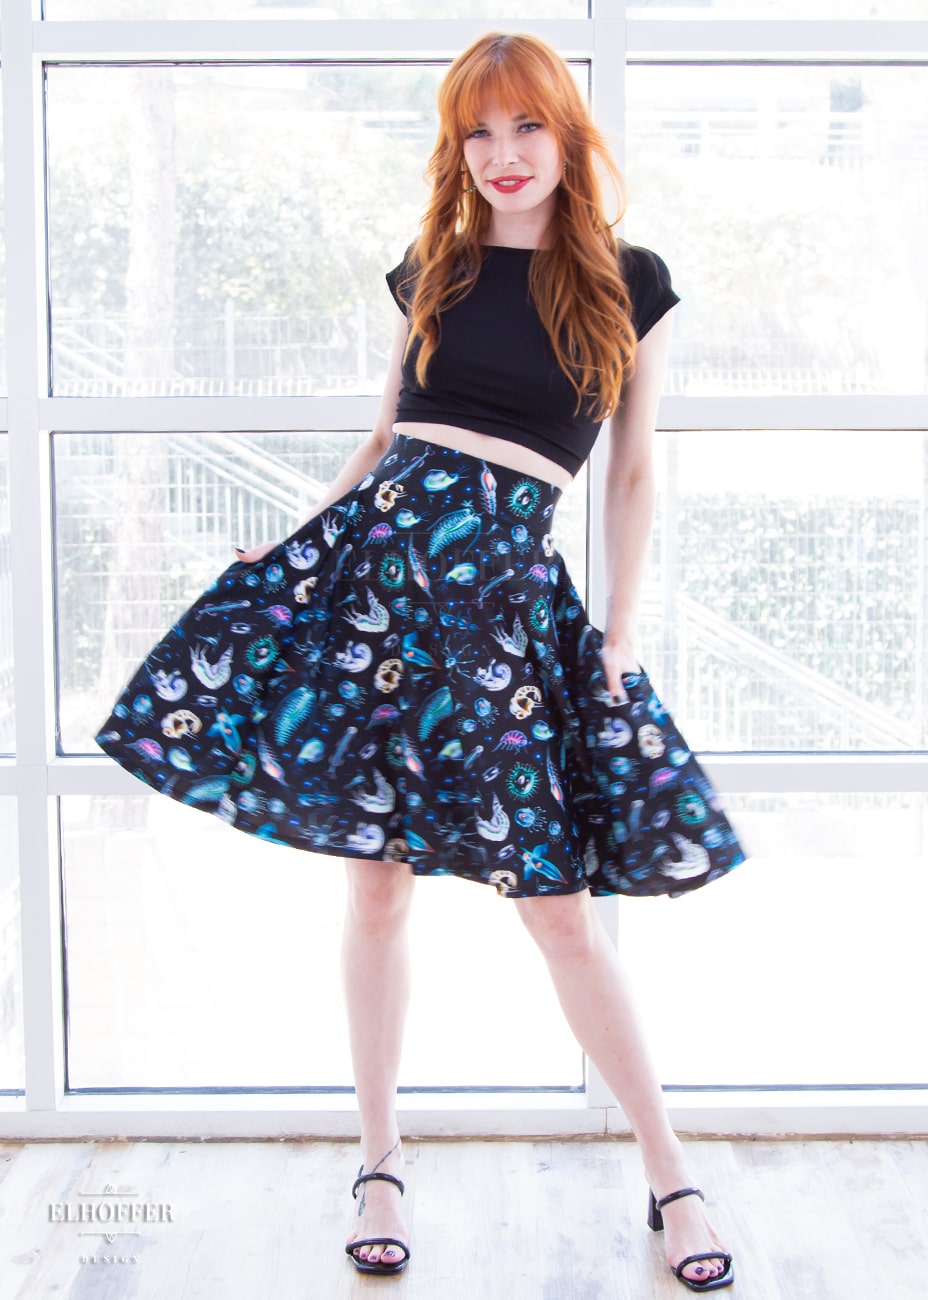 Chloe, a fair skinned size XS model with red hair and bangs, wears a high-waisted knee length full skirt with a fitted matching waistband encased with elastic in our not sea moths print. The print has various small sea creatures on a black background.